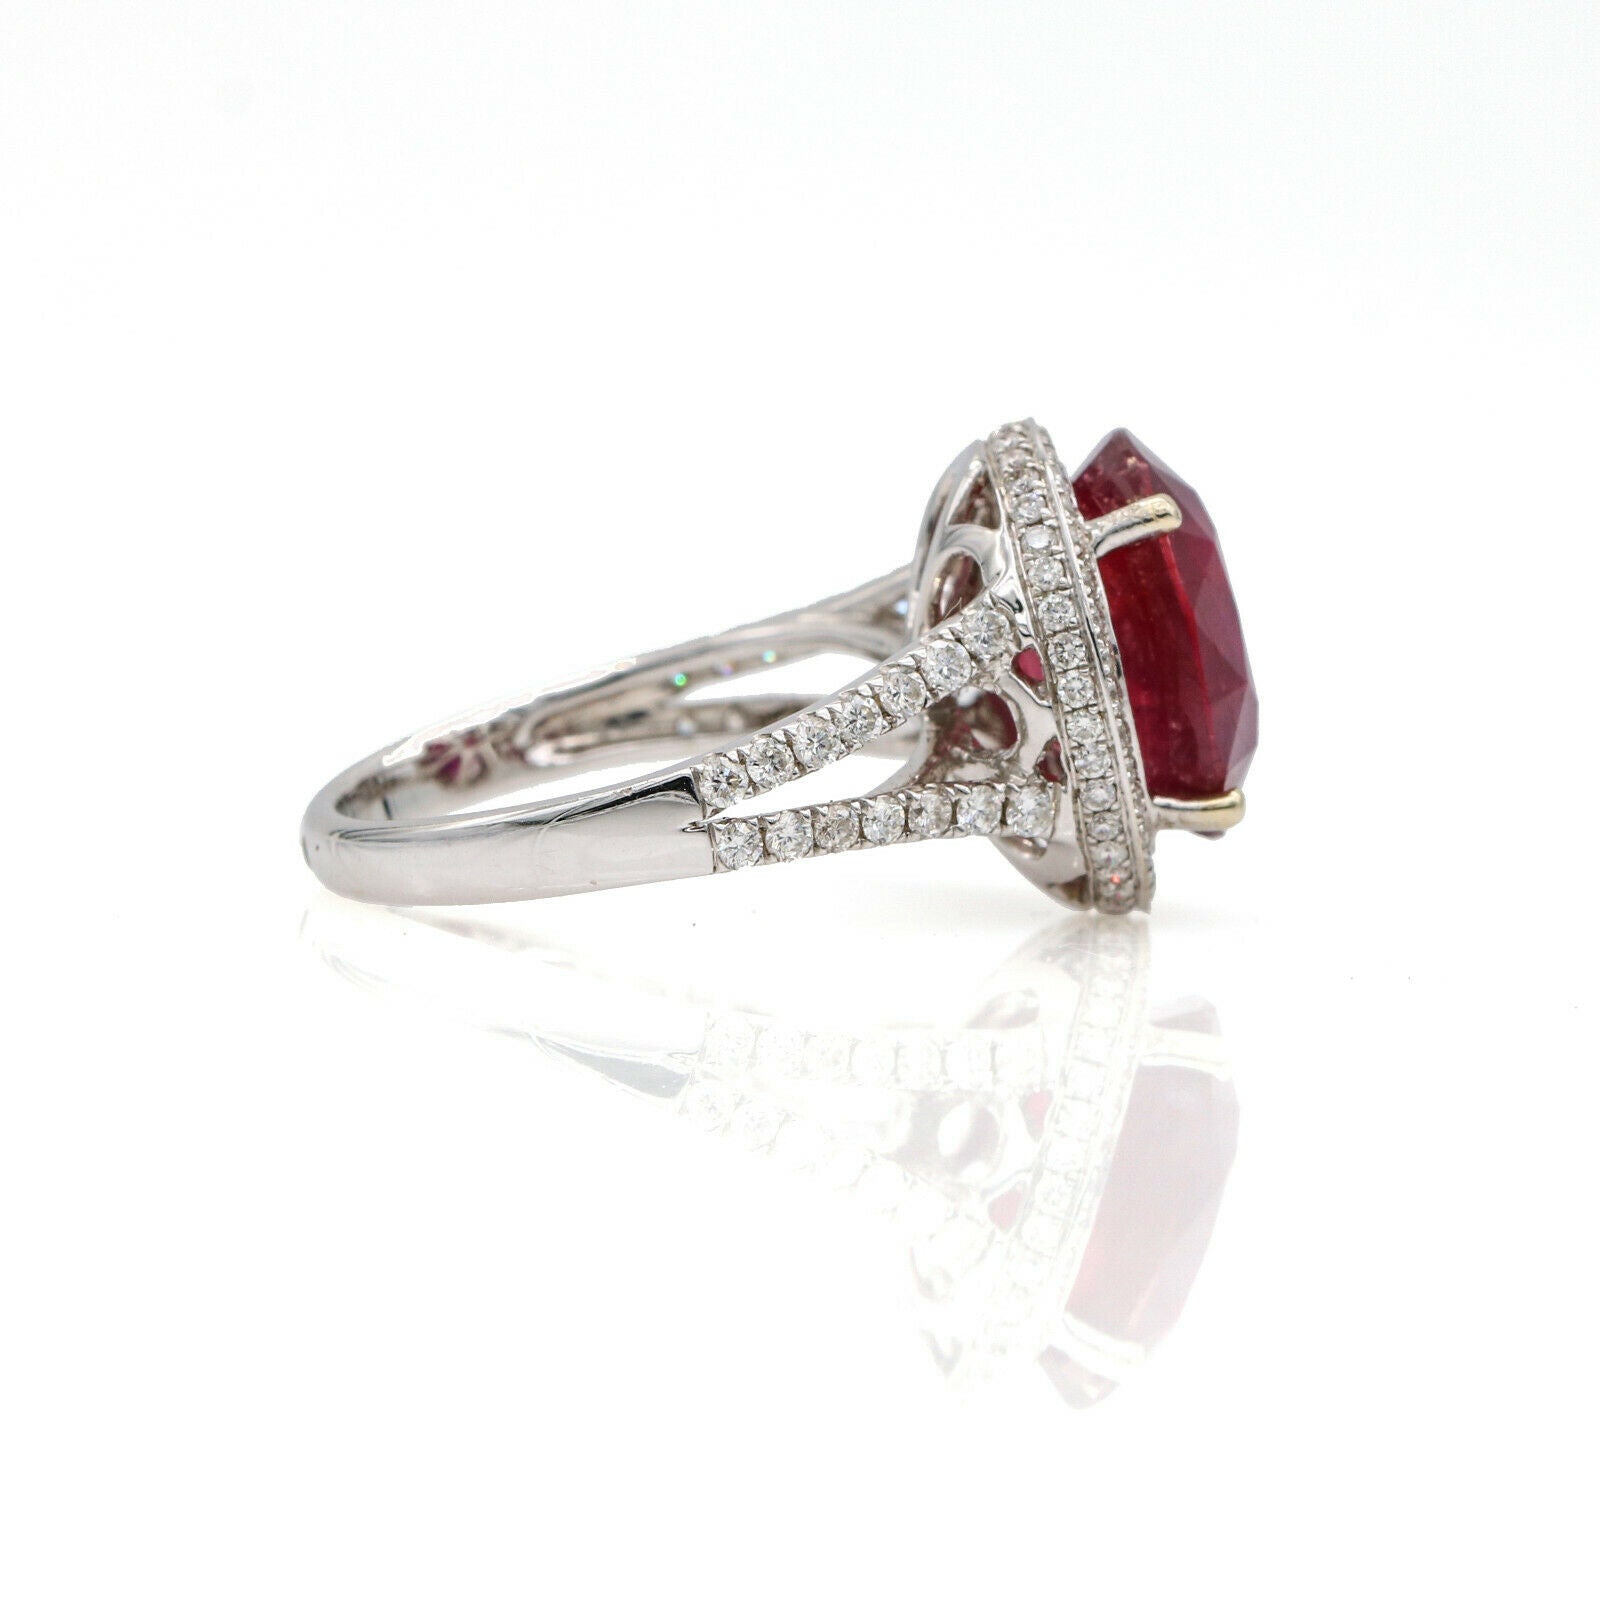 6.26 ct Ruby and Diamond Halo Engagement Ring in 18k White Gold